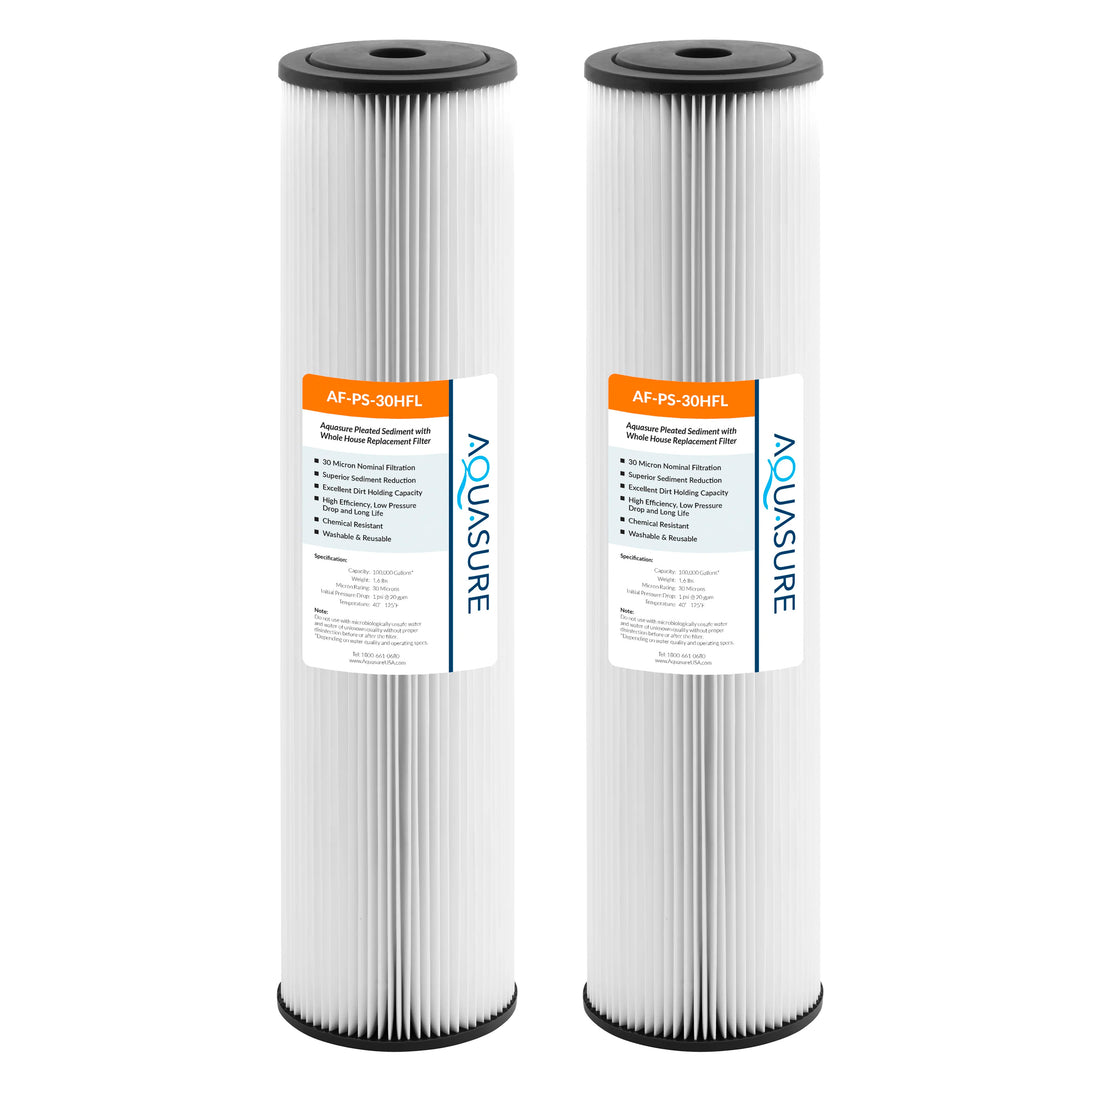 Fortitude V2 Series | High Flow 30 Micron Pleated Sediment Filter - Large (2-Pack)